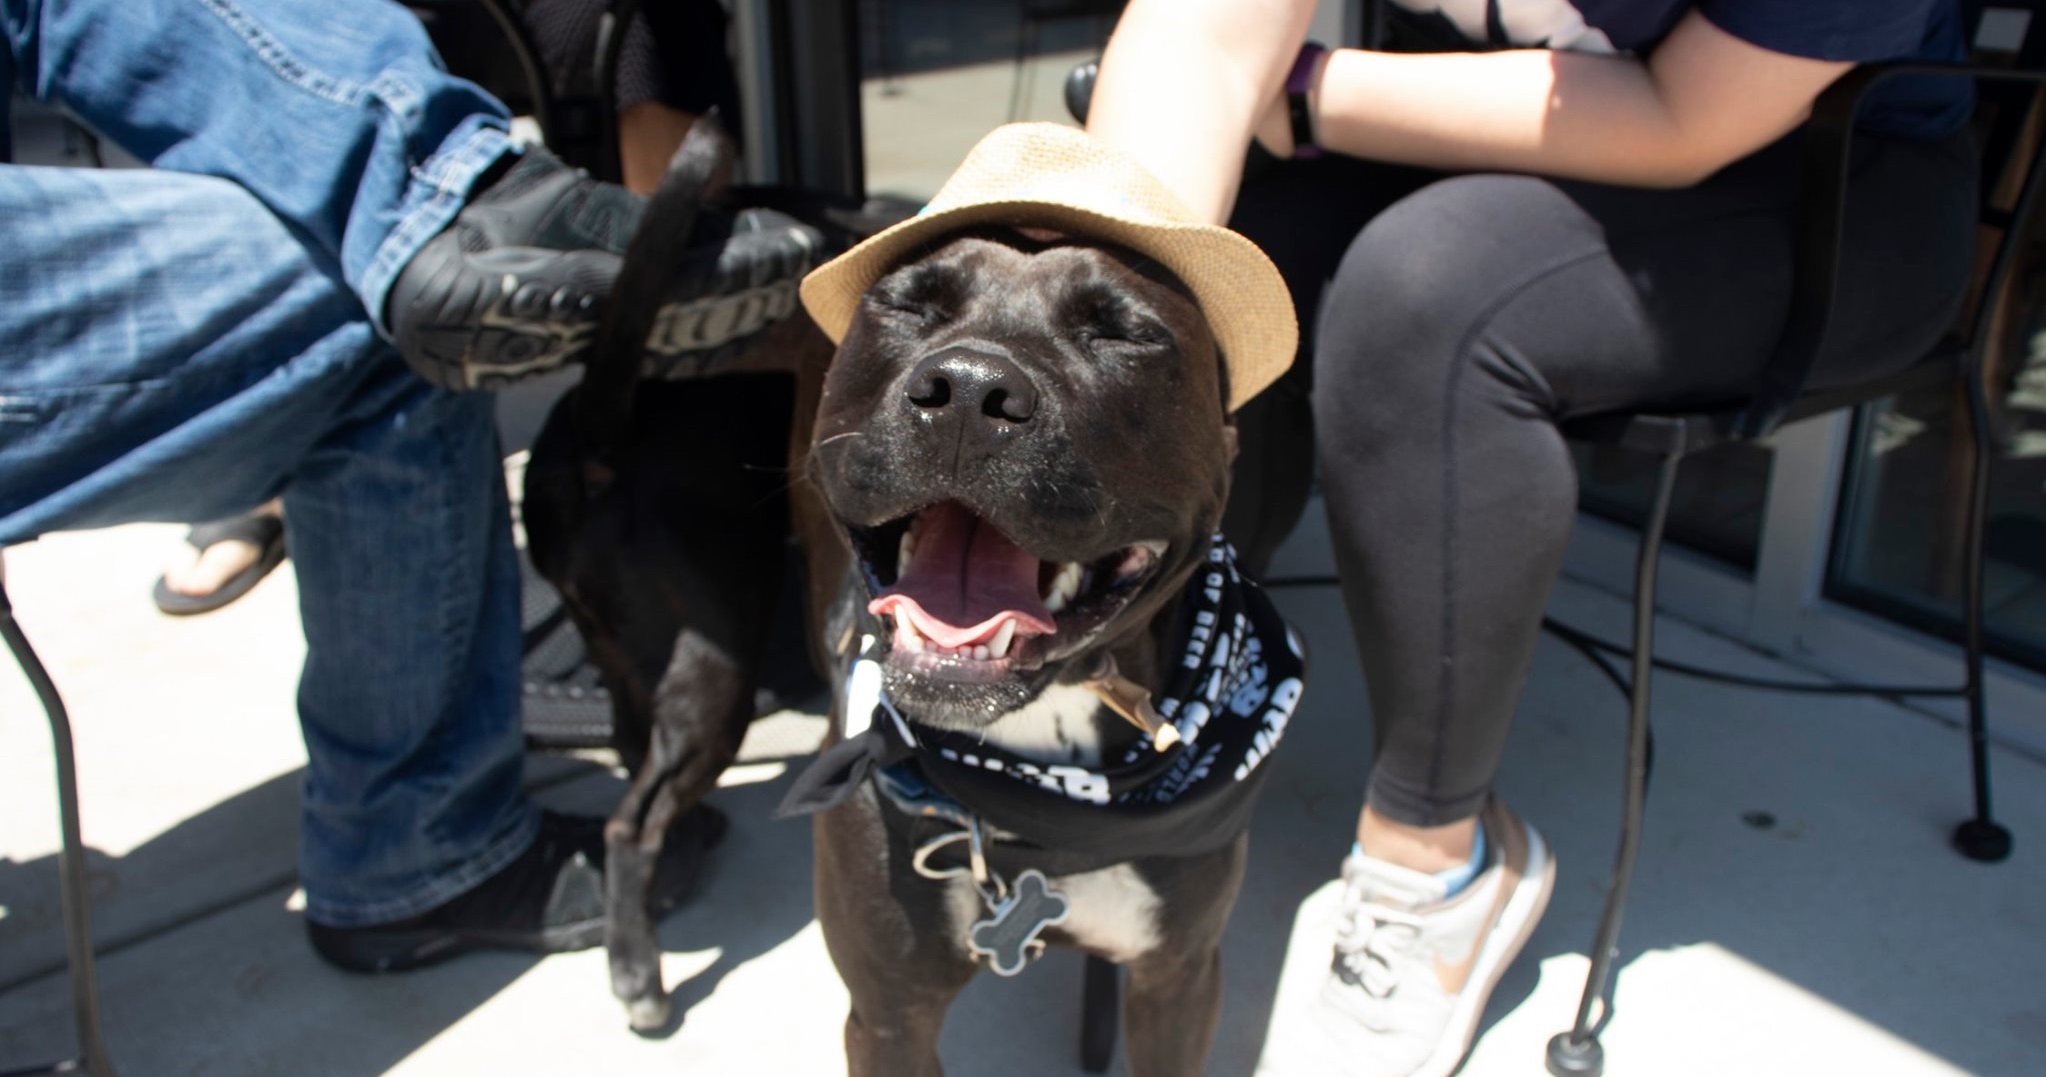 Meet Stout, World of Beer’s Pet of the Month!